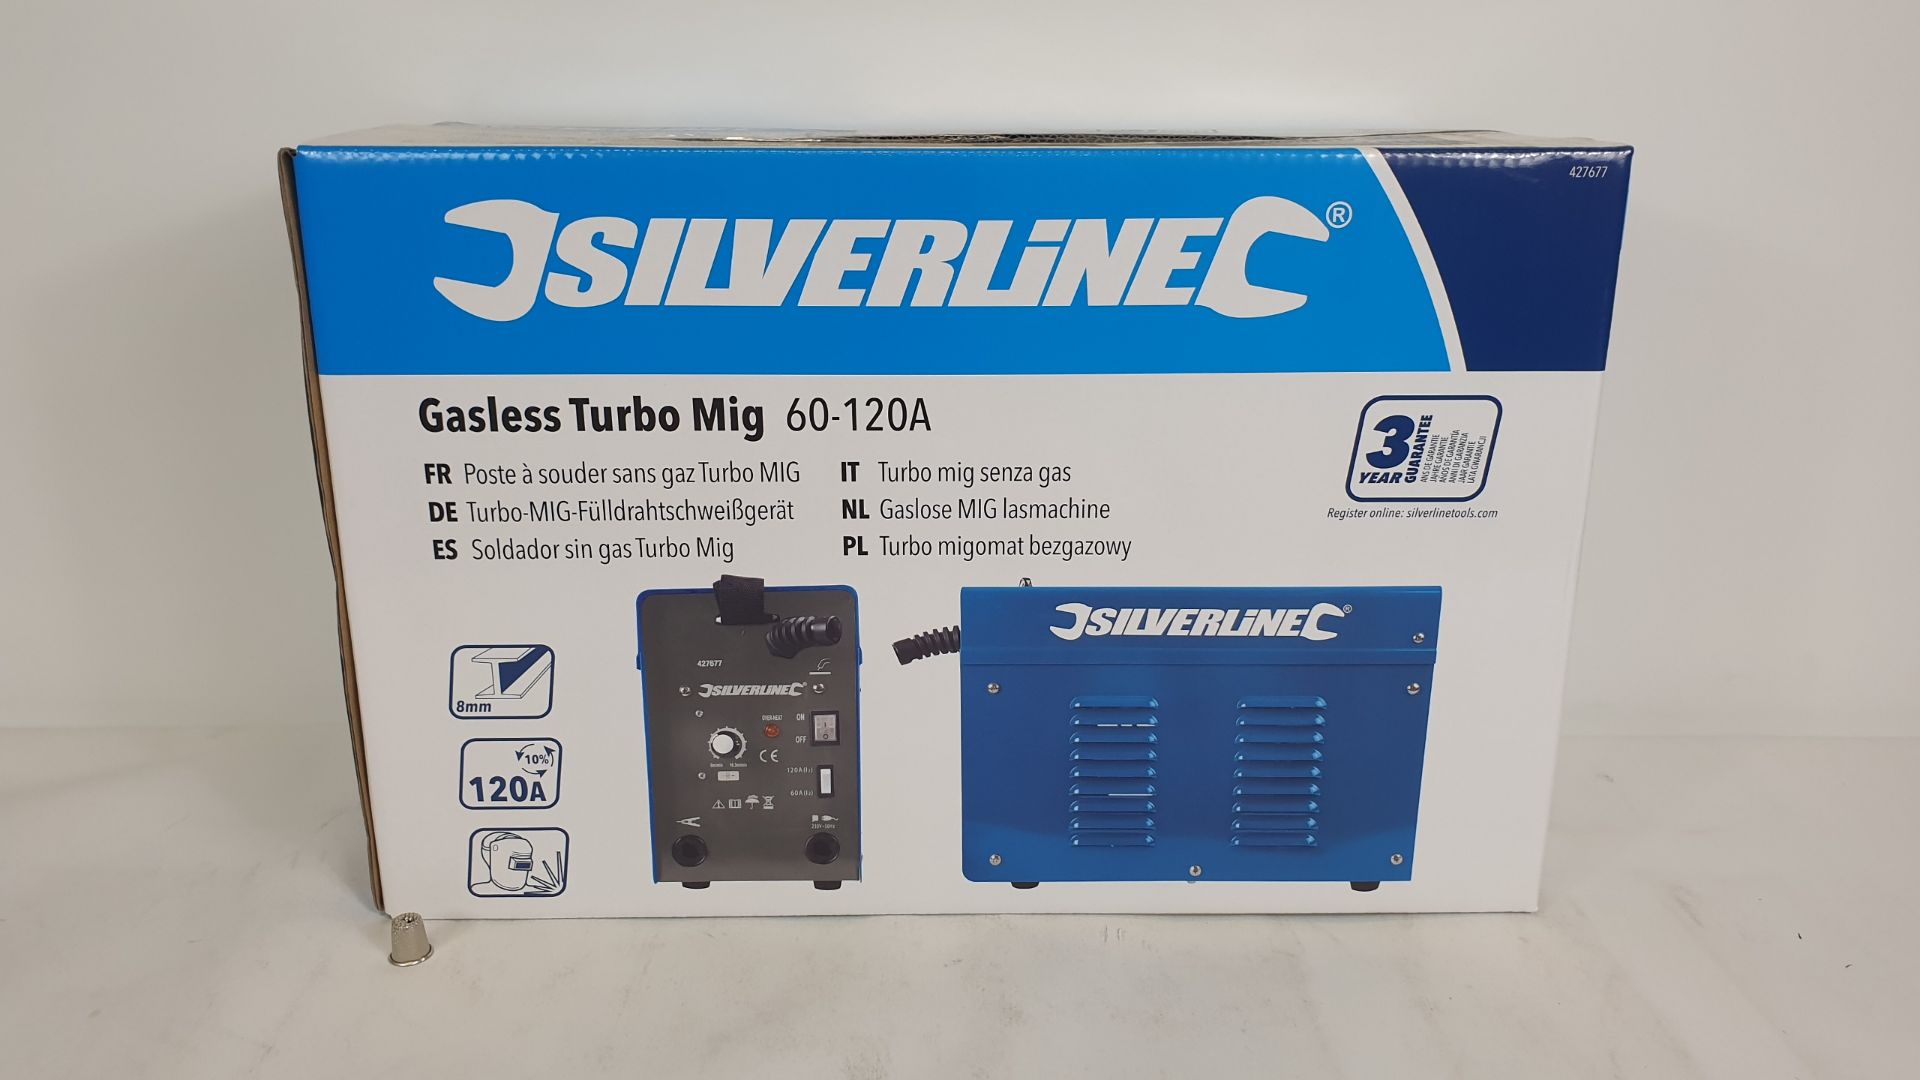 BRAND NEW BOXED SILVERLINE GASLESS TURBO MIG WELDING SET 60 - 120A (PRODUCT CODE 427677)